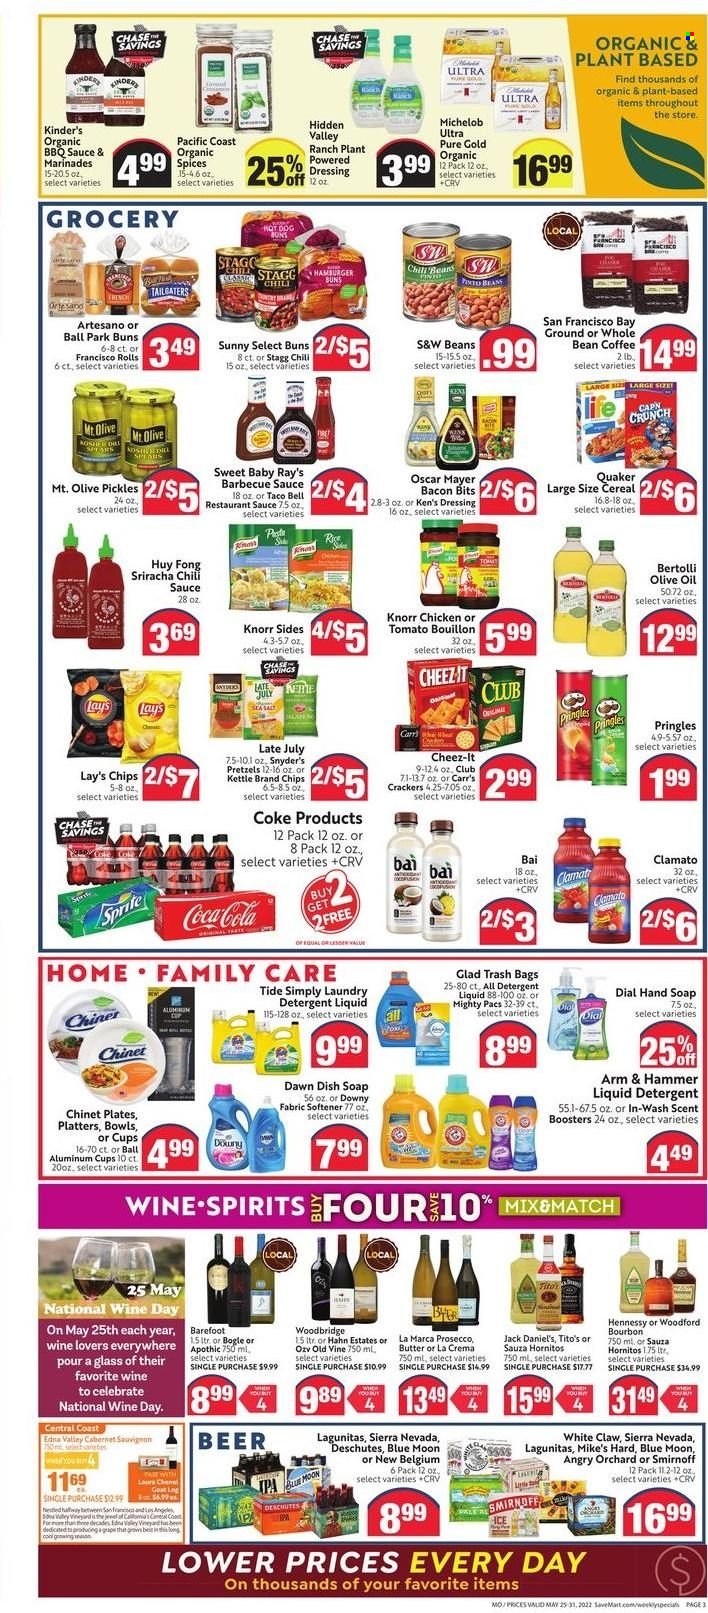 thumbnail - Save Mart Flyer - 05/25/2022 - 05/31/2022 - Sales products - pretzels, buns, burger buns, hot dog, Jack Daniel's, Knorr, Quaker, Bertolli, bacon bits, Oscar Mayer, goat cheese, butter, crackers, Pringles, chips, Lay’s, Cheez-It, ARM & HAMMER, bouillon, pickles, pinto beans, cereals, rice, dill, BBQ sauce, sriracha, chilli sauce, dressing, olive oil, oil, Coca-Cola, Sprite, Clamato, Bai, coffee, Cabernet Sauvignon, prosecco, Woodbridge, bourbon, Smirnoff, Hennessy, White Claw, beer, IPA, Hahn, Tide, fabric softener, liquid detergent, laundry detergent, scent booster, Downy Laundry, hand soap, Dial, soap, Blue Moon, Michelob. Page 3.